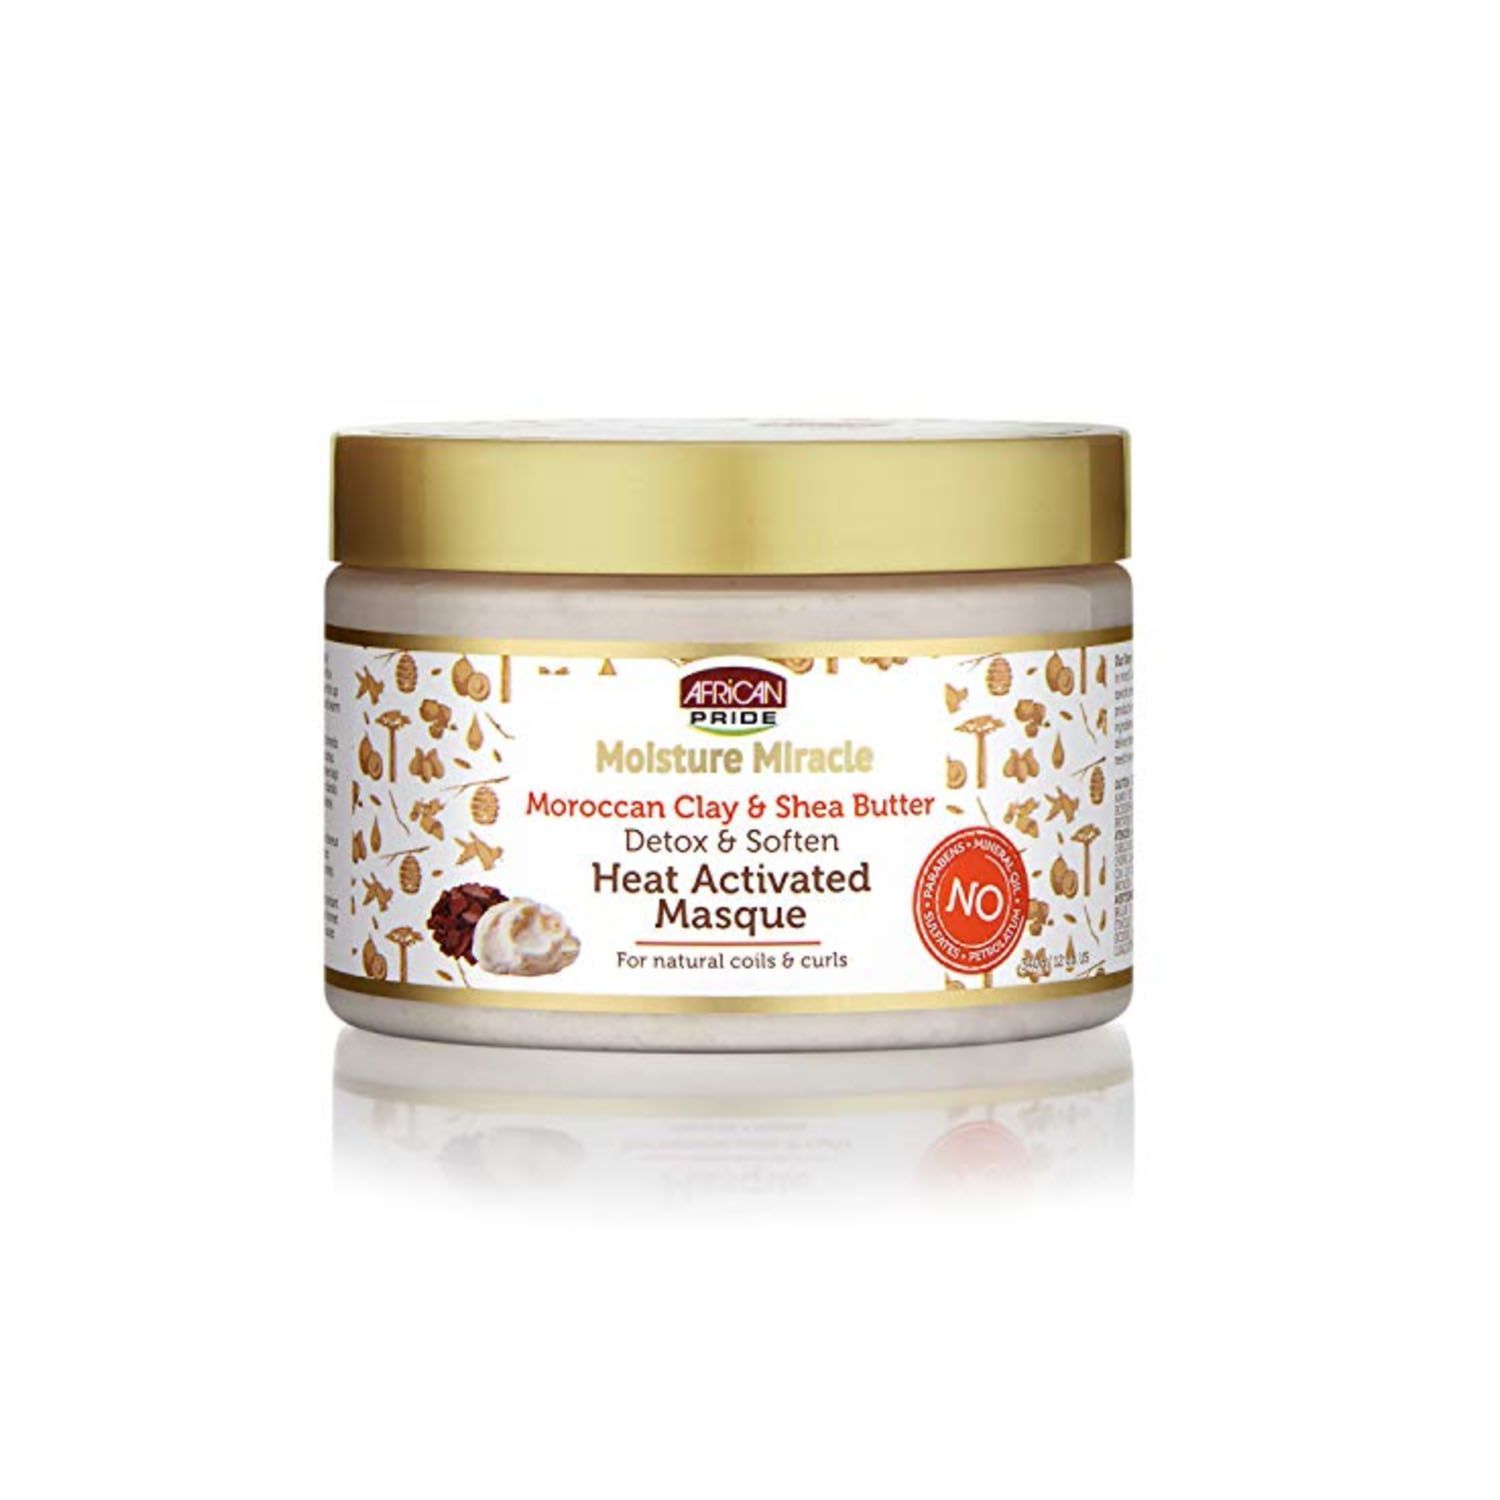 Miracle Moroccan Clay & Shea Butter Heat Activated Masque